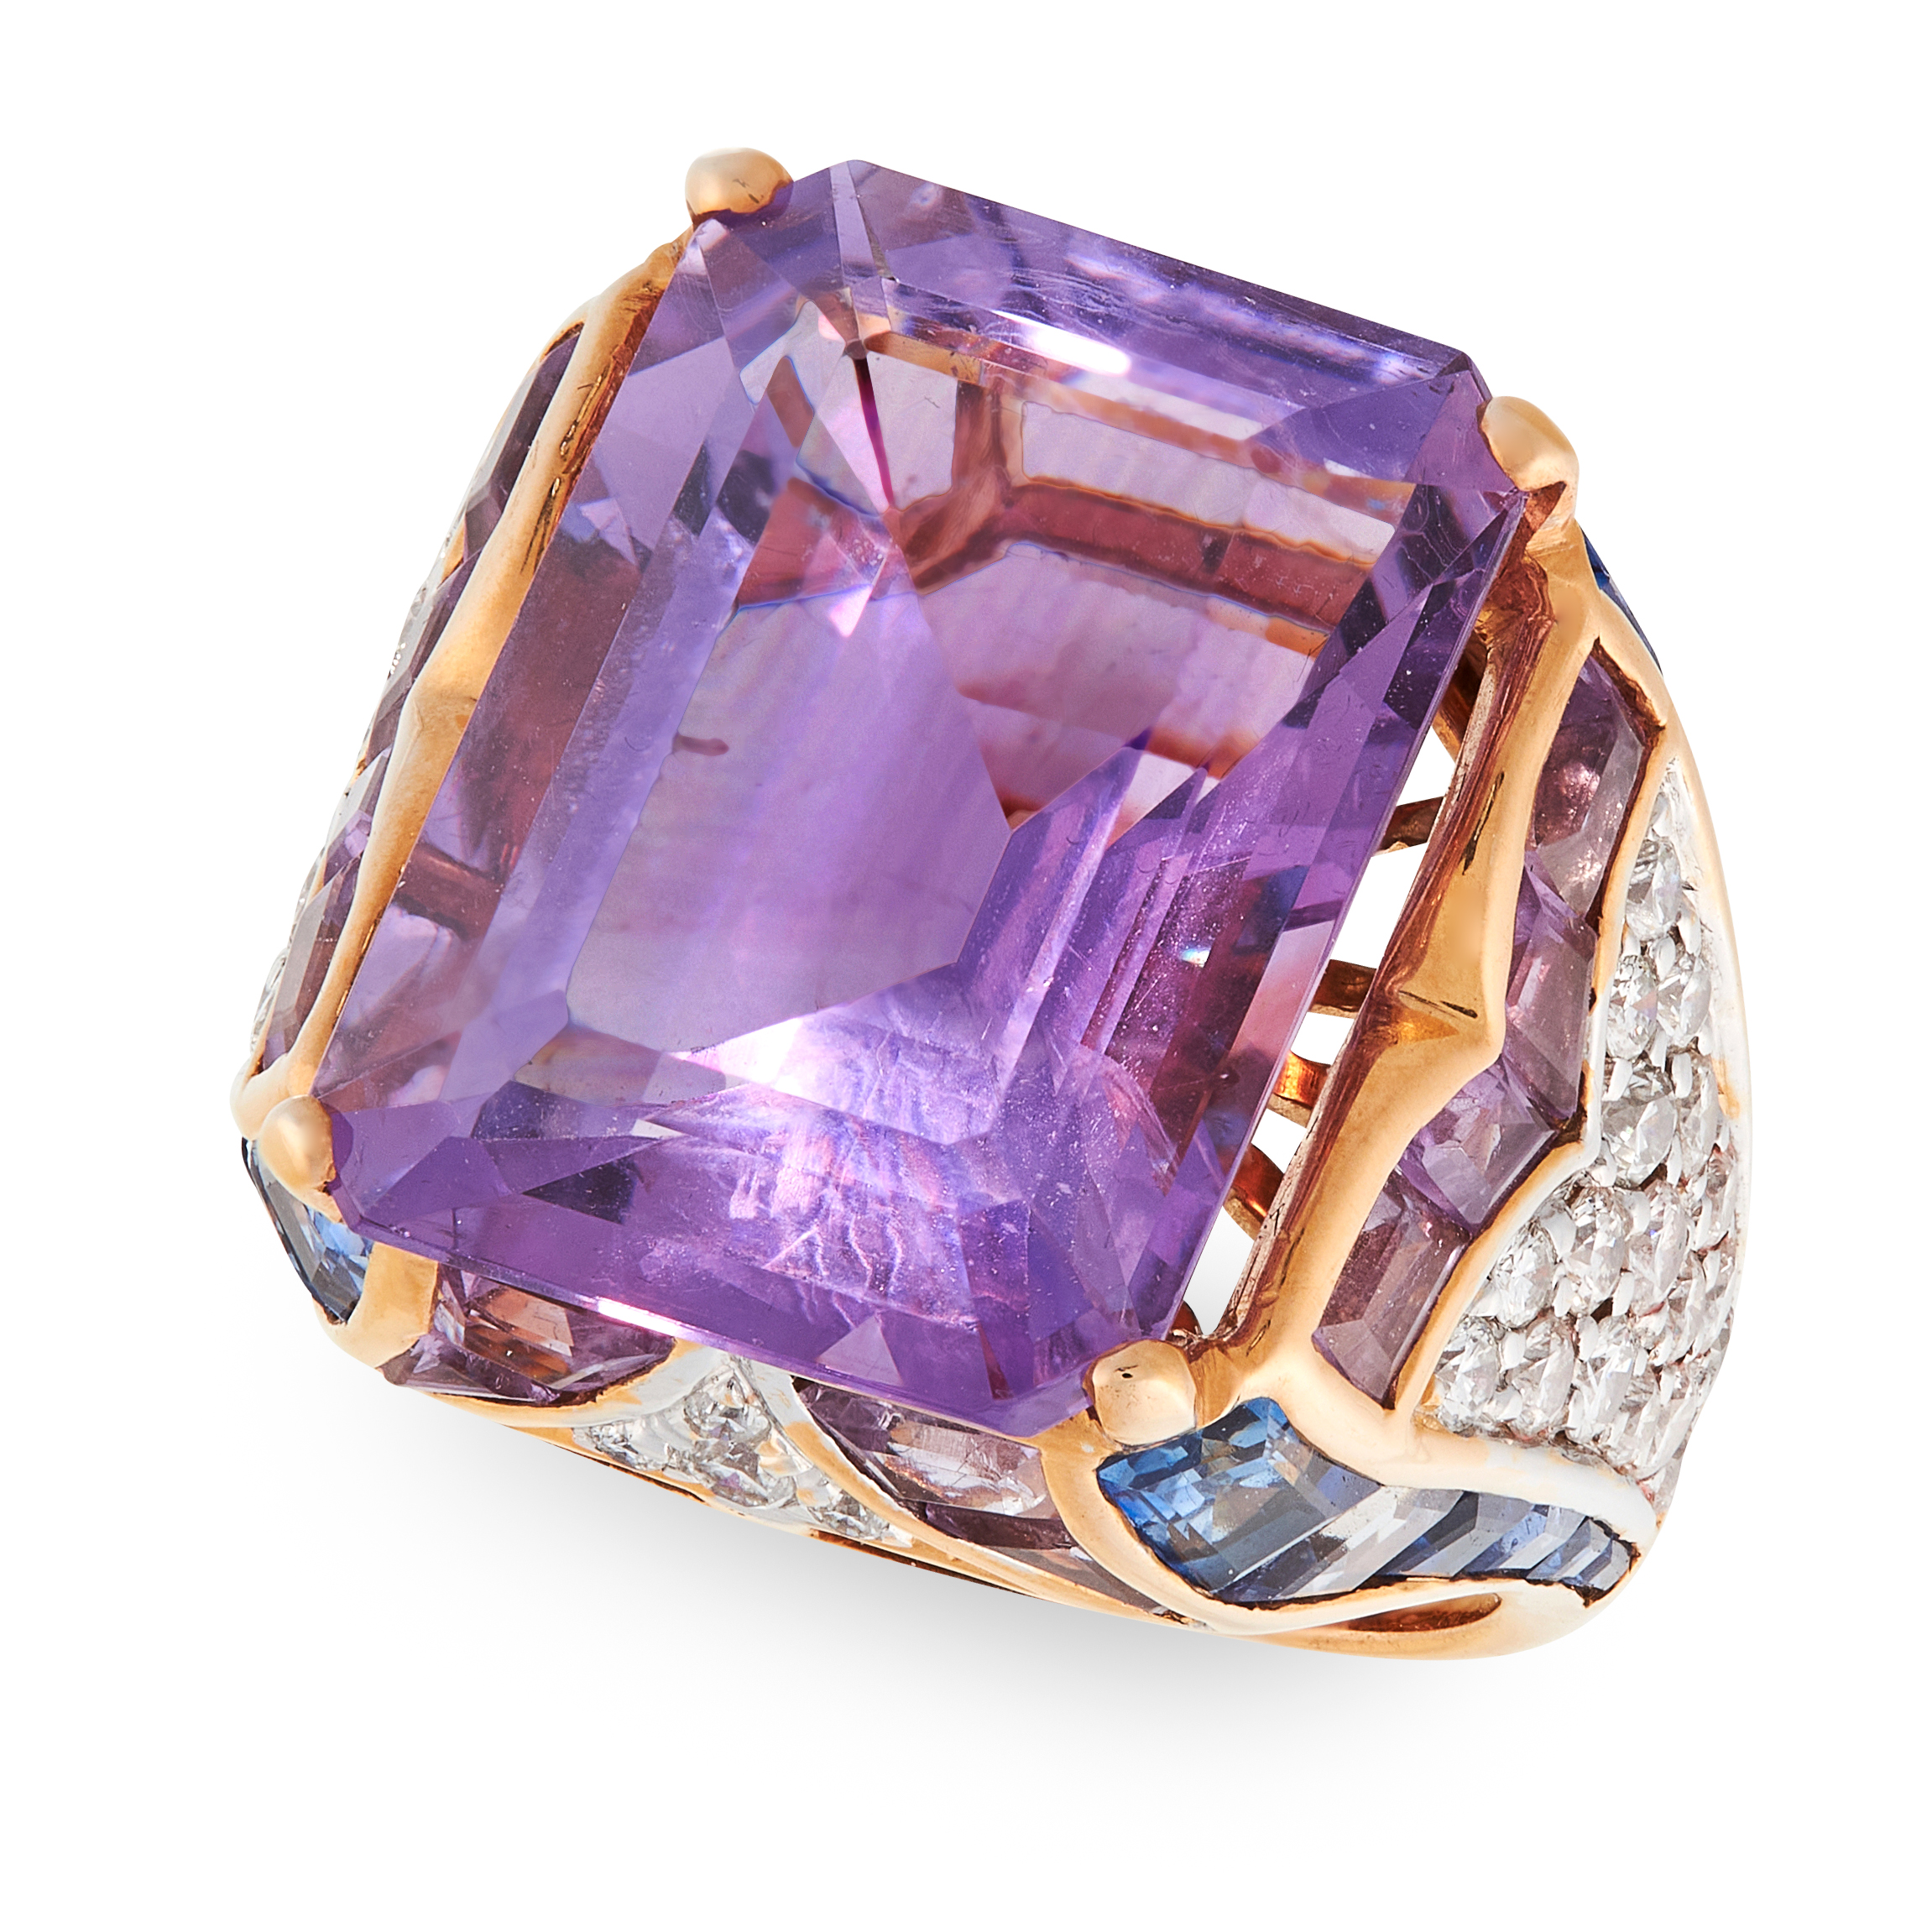 AN AMETHYST DIAMOND AND SAPPHIRE DRESS RING set with a central emerald cut amethyst of approximately